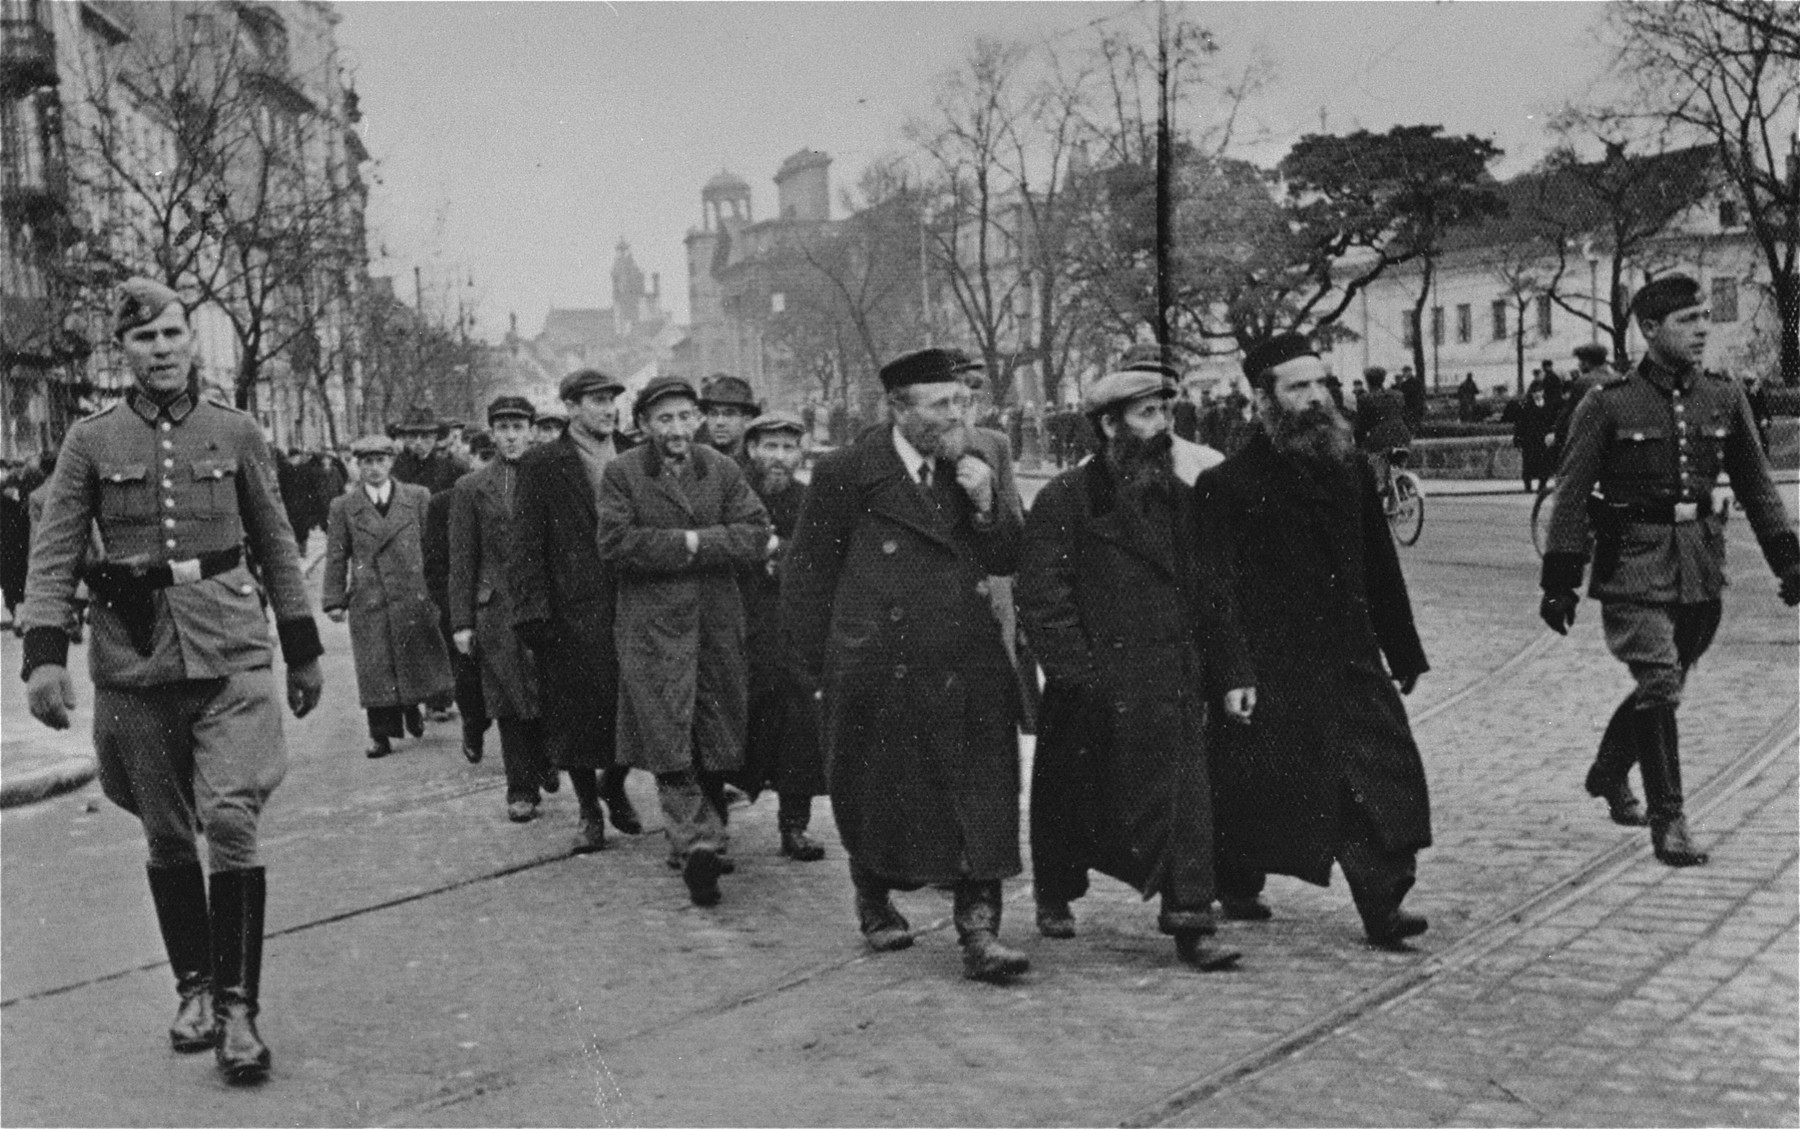 Polish Jews being gathered by German police as forced laborers, Warsaw, Poland, Mar 1940